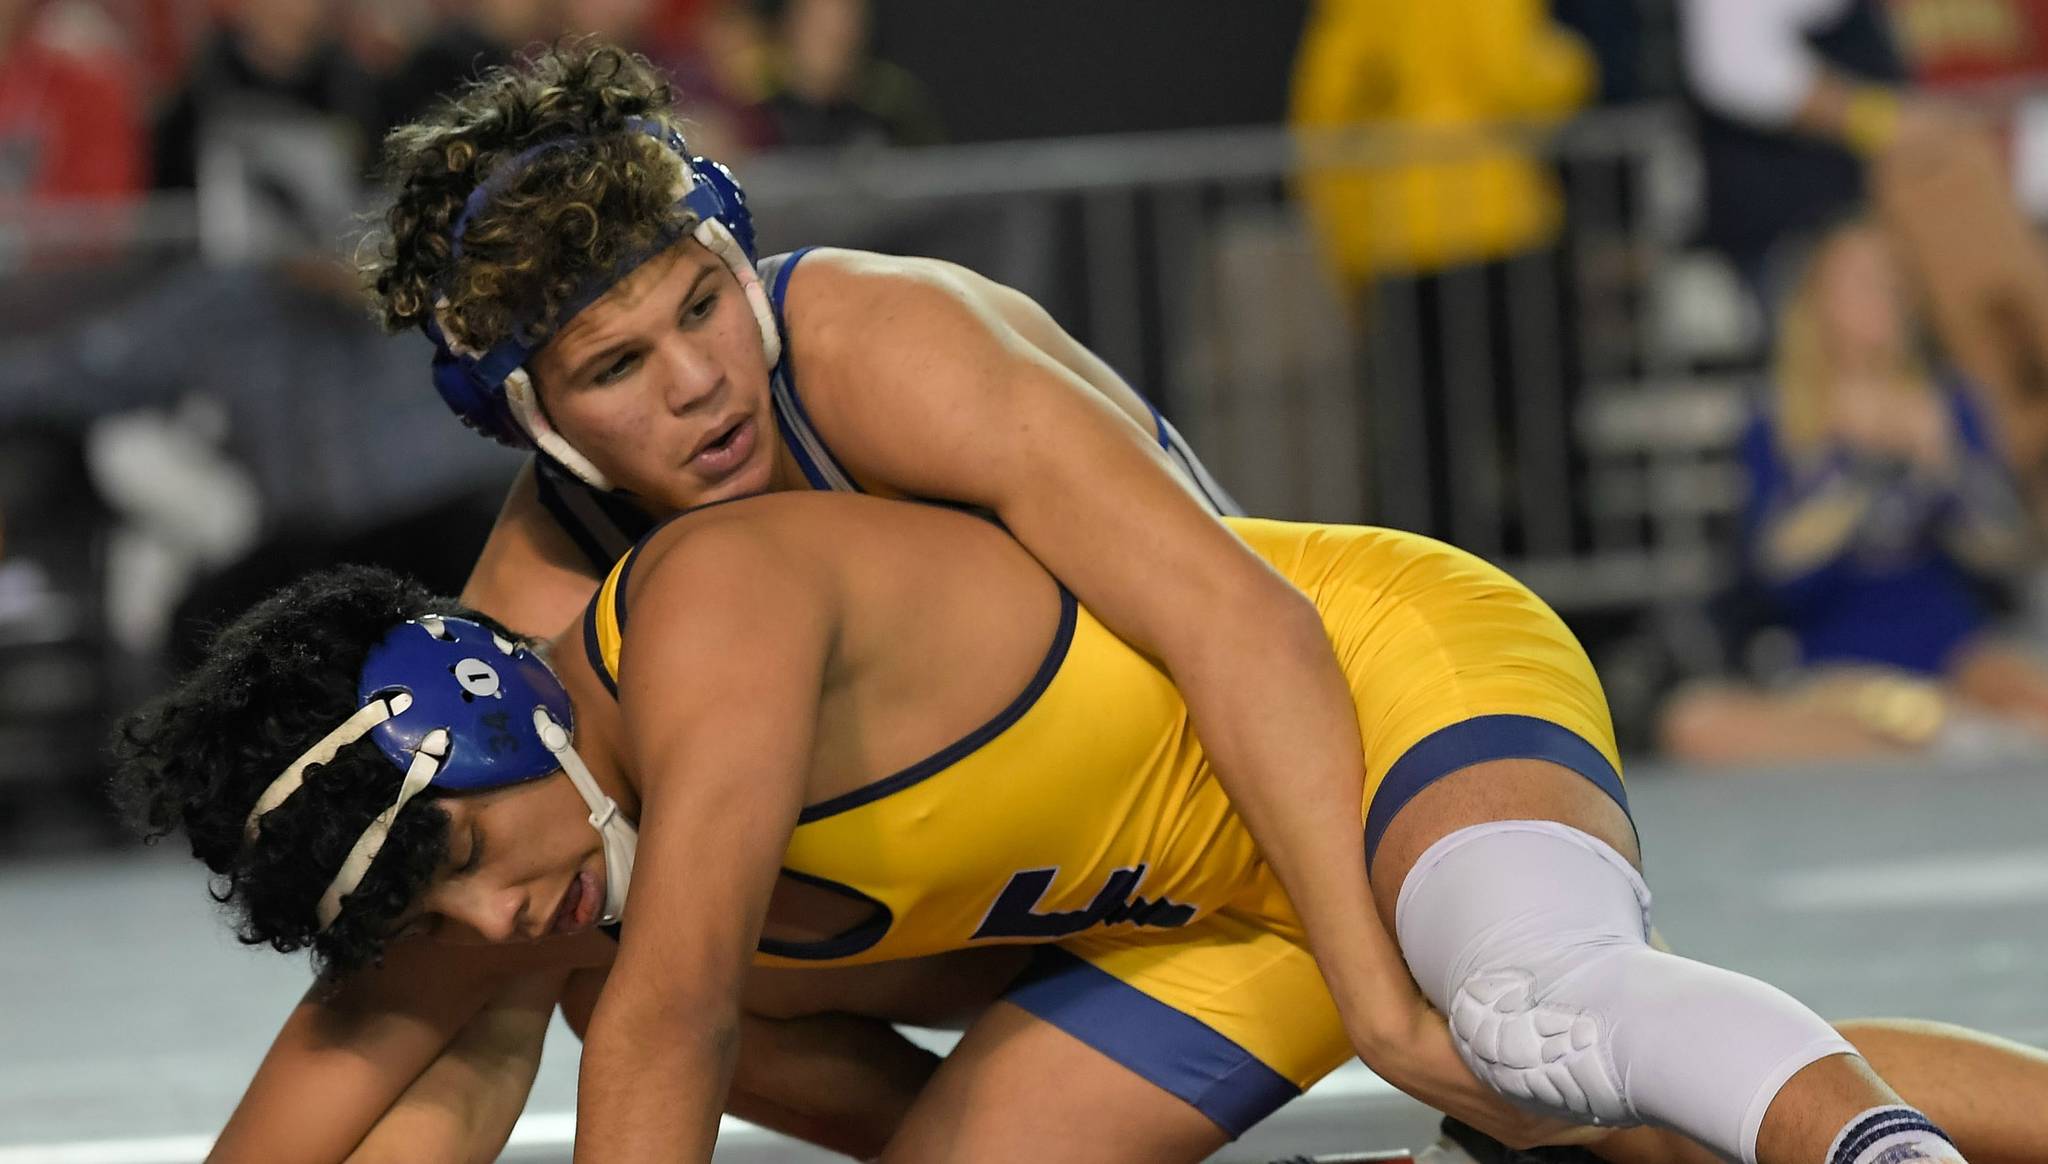 Epp and Lopez shine at Mat Classic XXXII